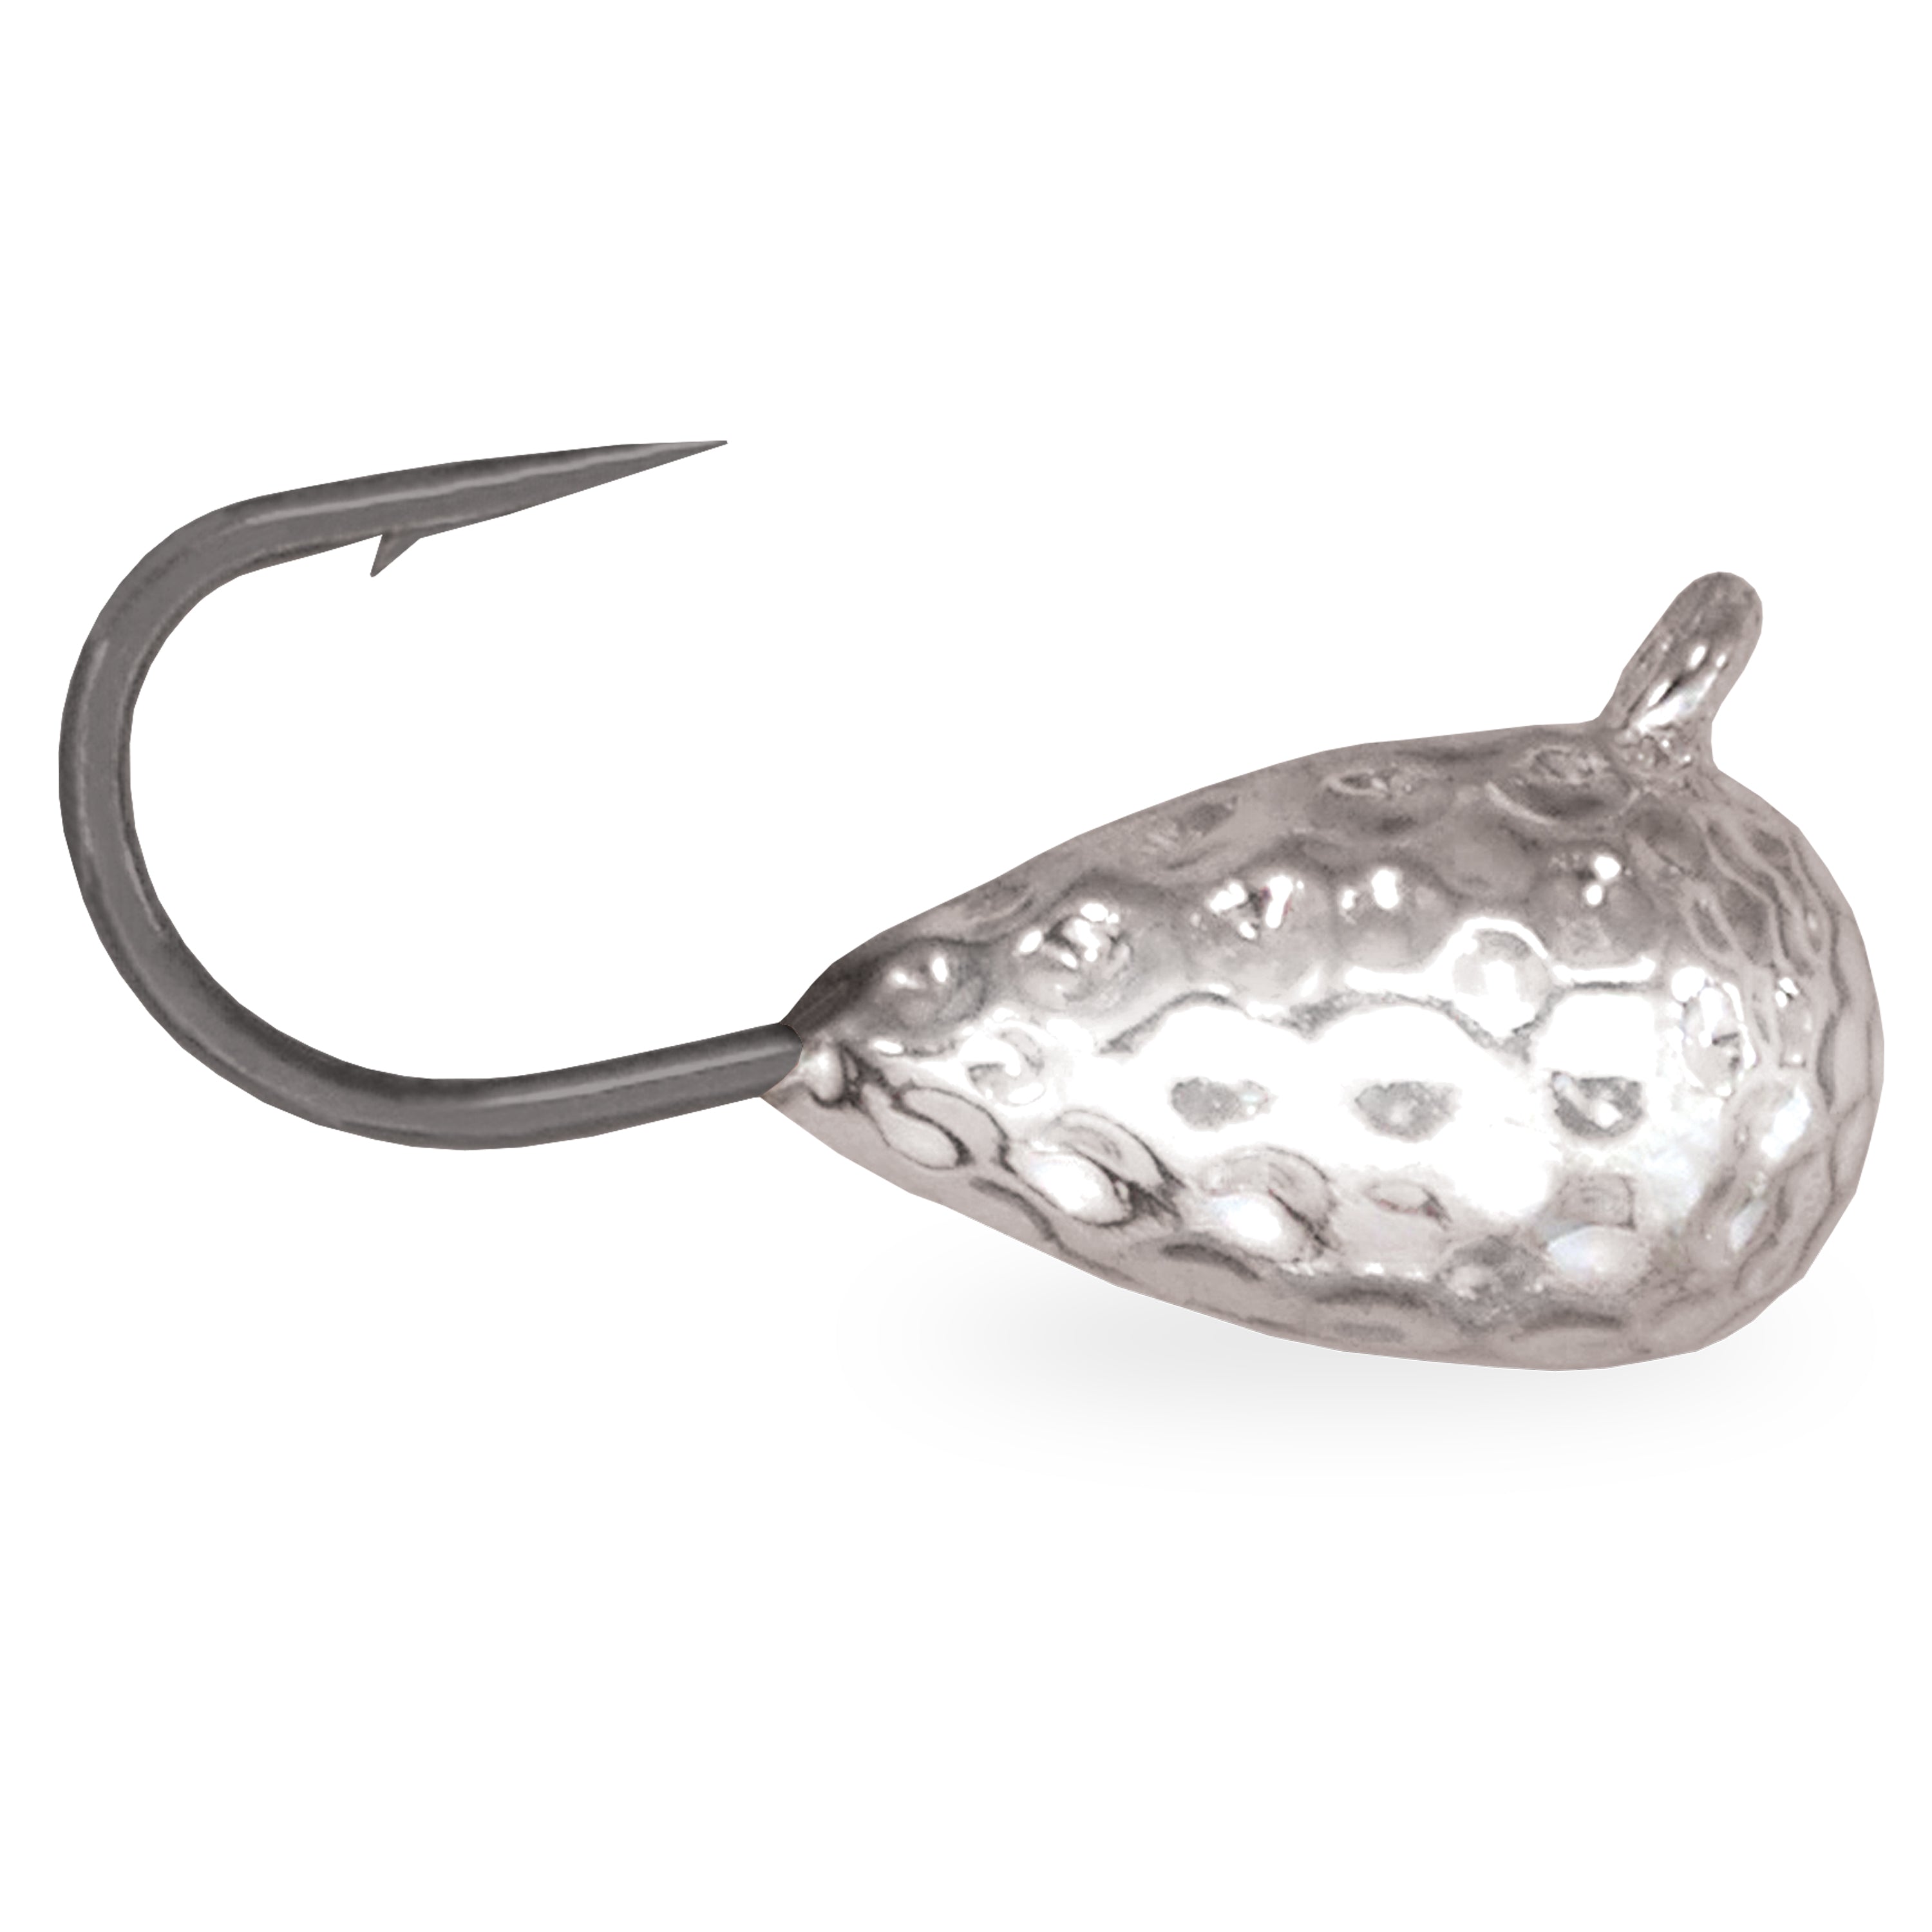 Acme Tackle - Hammered Tungsten Ice Jigs (2 Pack) - Acme Tackle Company